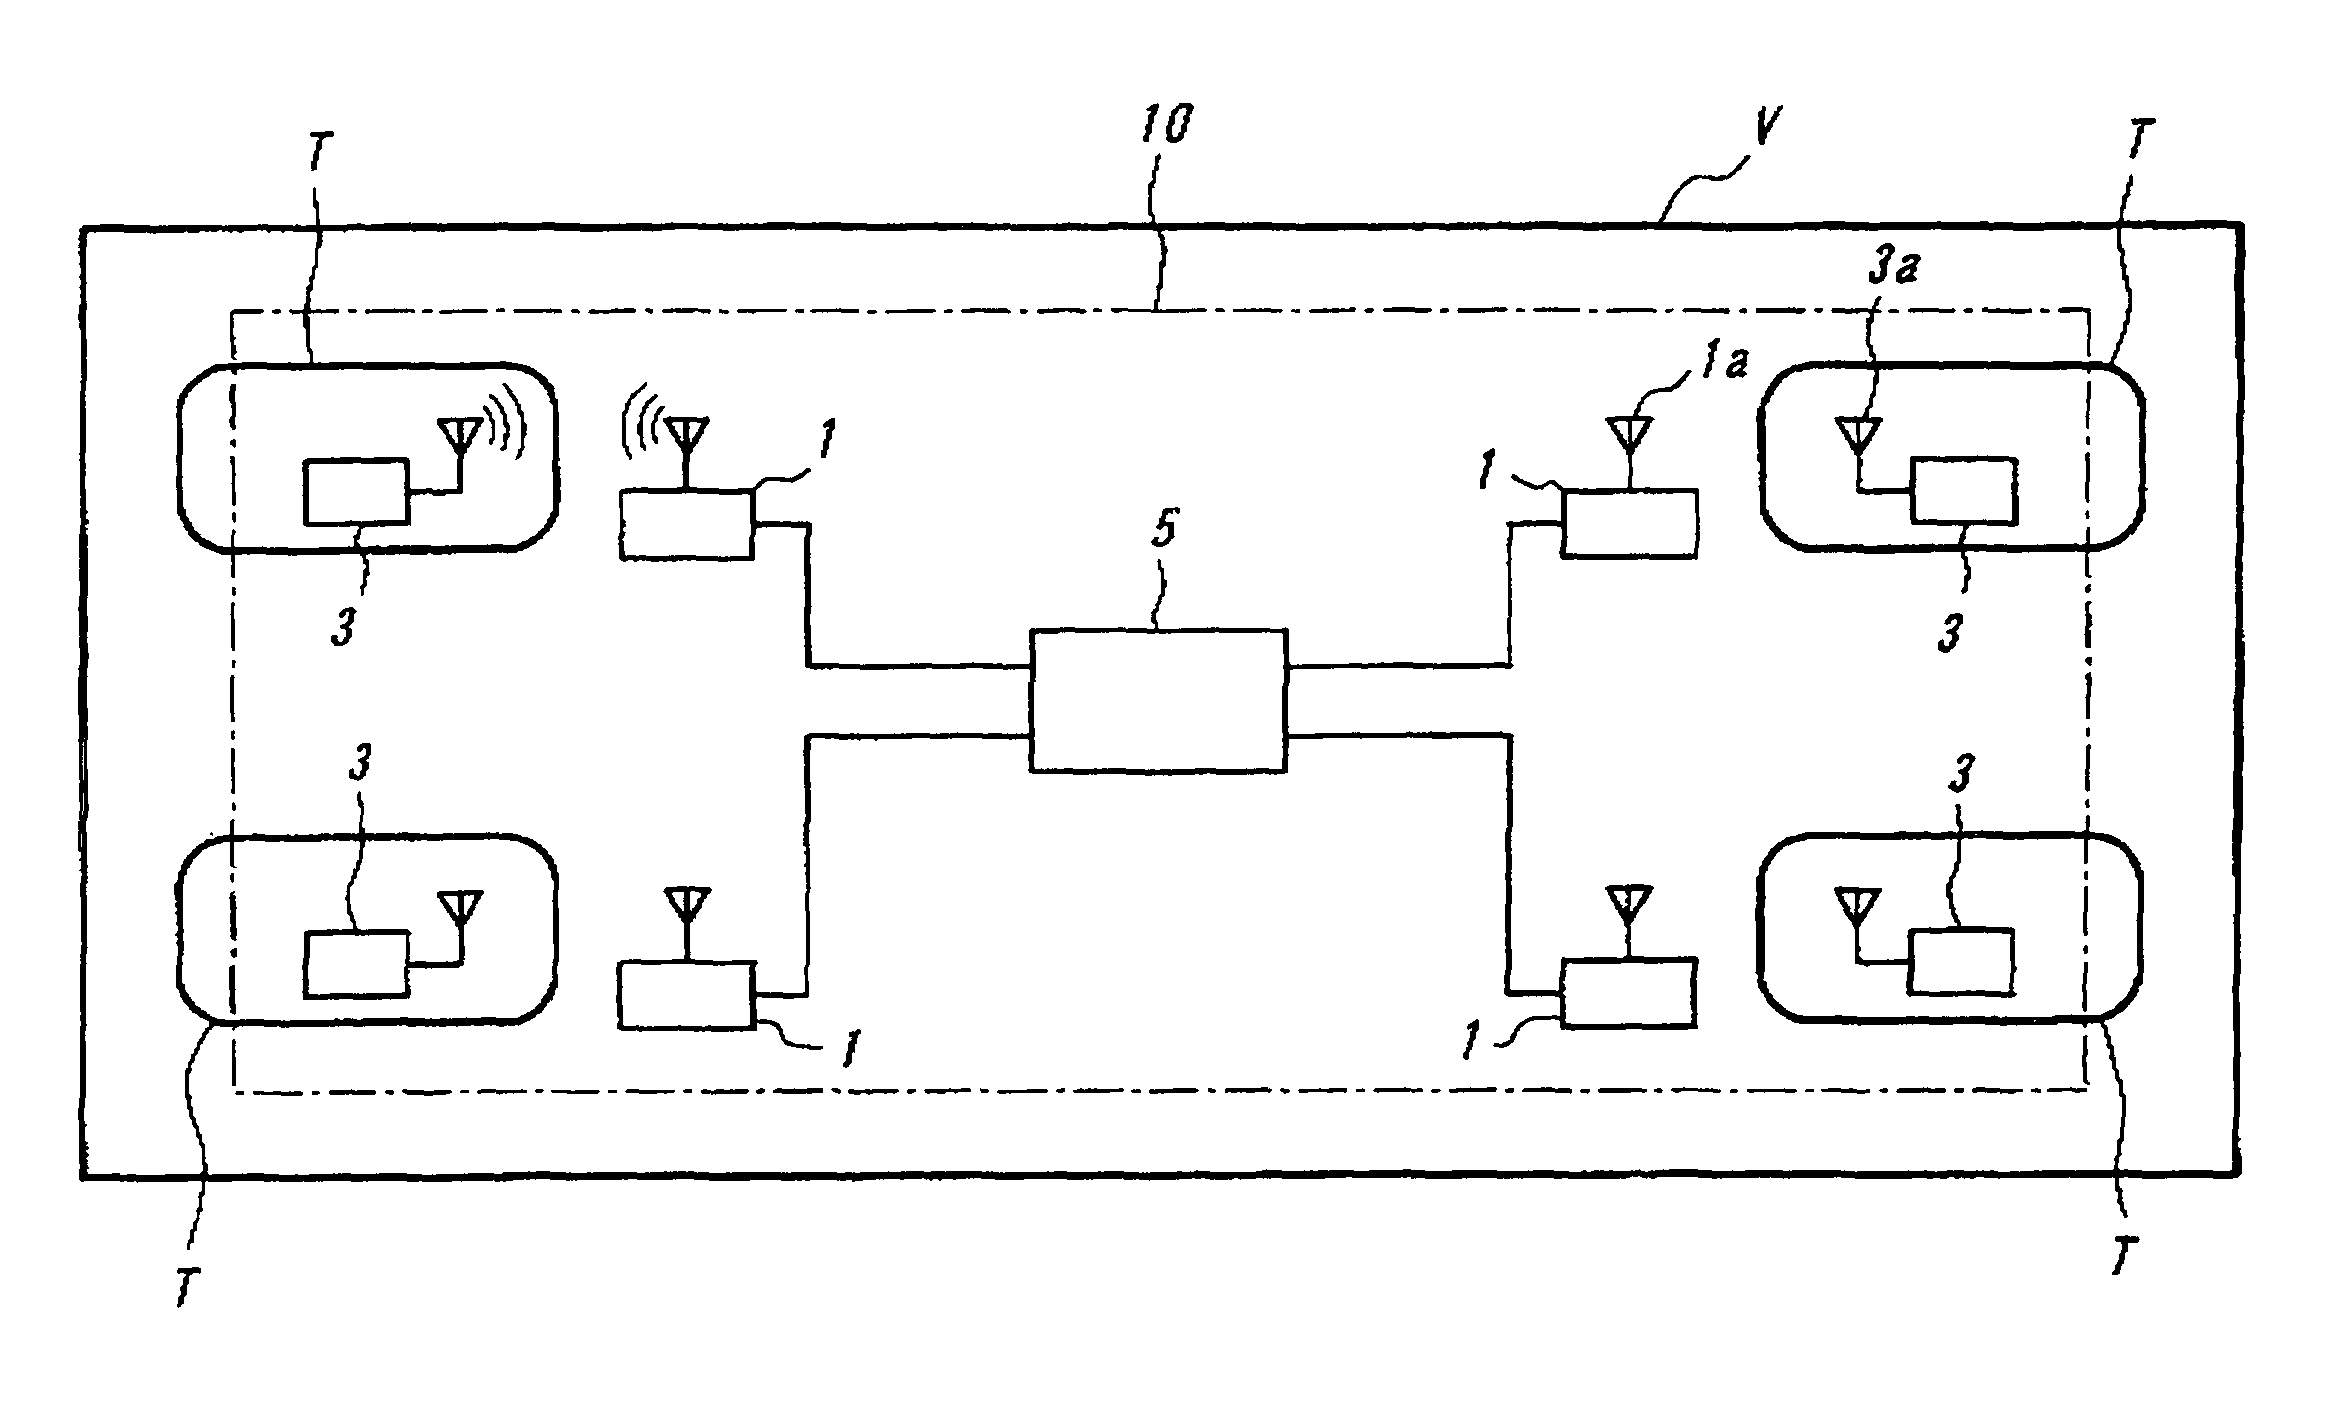 Tire management system with data demanding signal and tire status value transmitting at different cycles